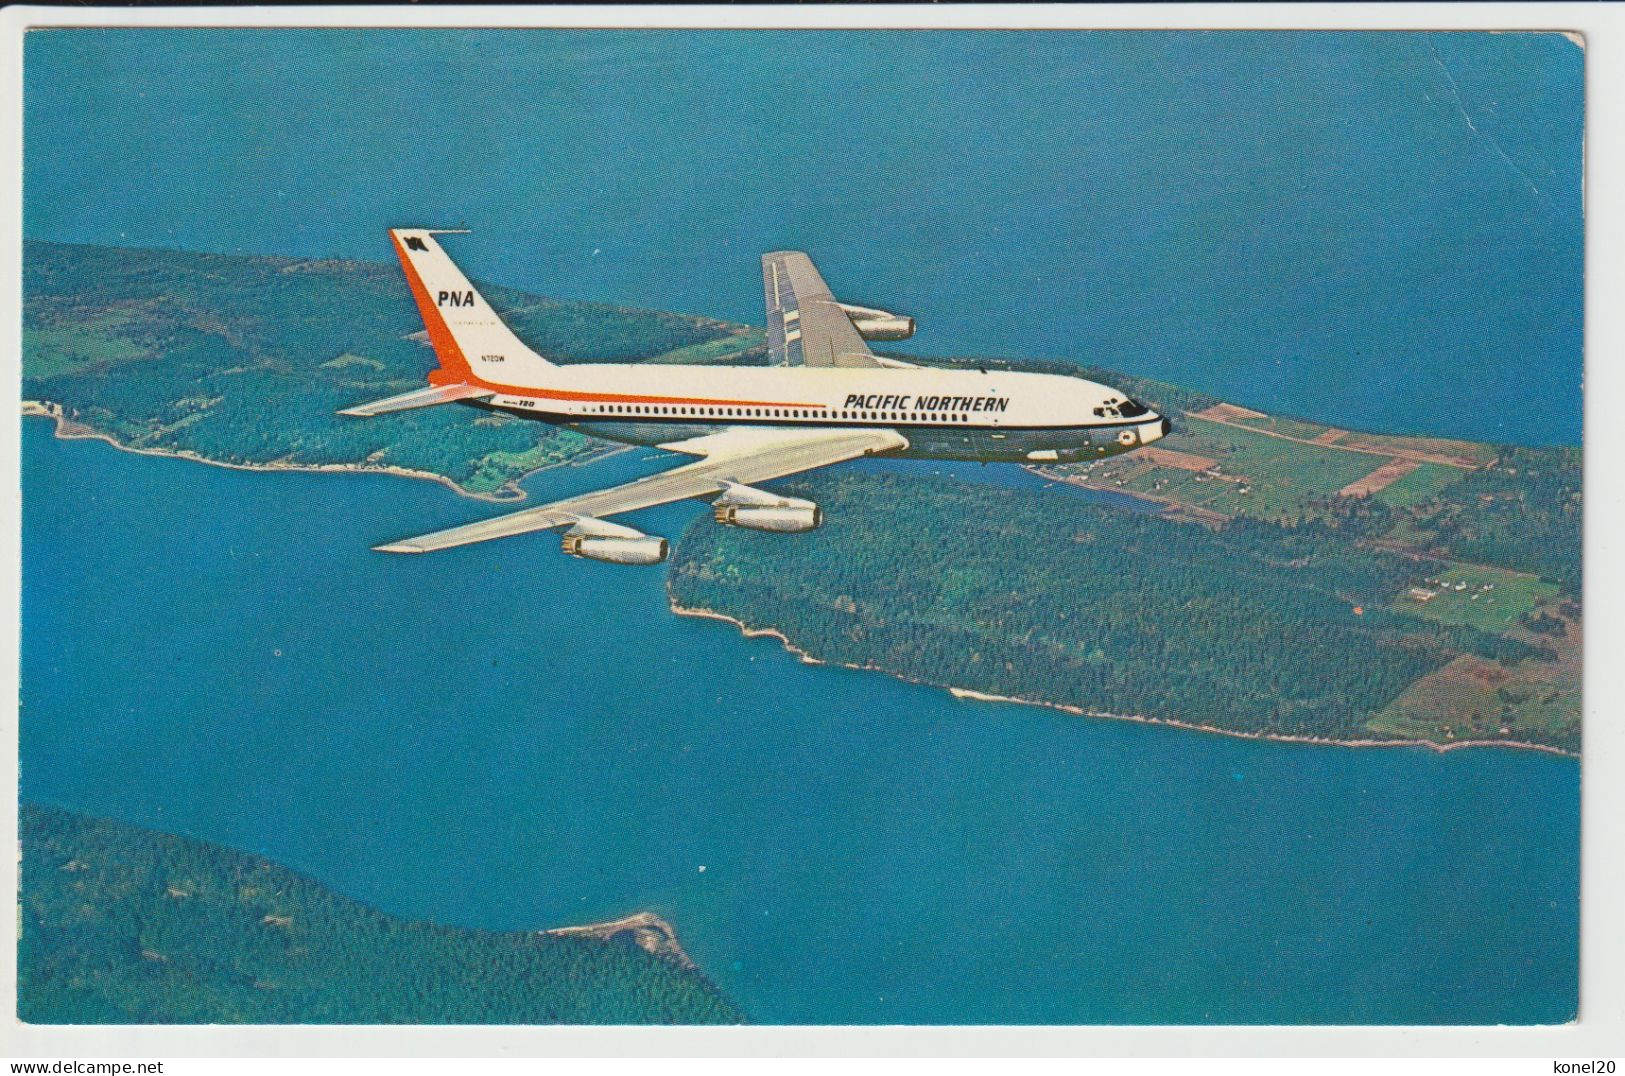 Vintage Pc PNA Pacific Northern Airlines Boeing 720 Aircraft - 1919-1938: Between Wars